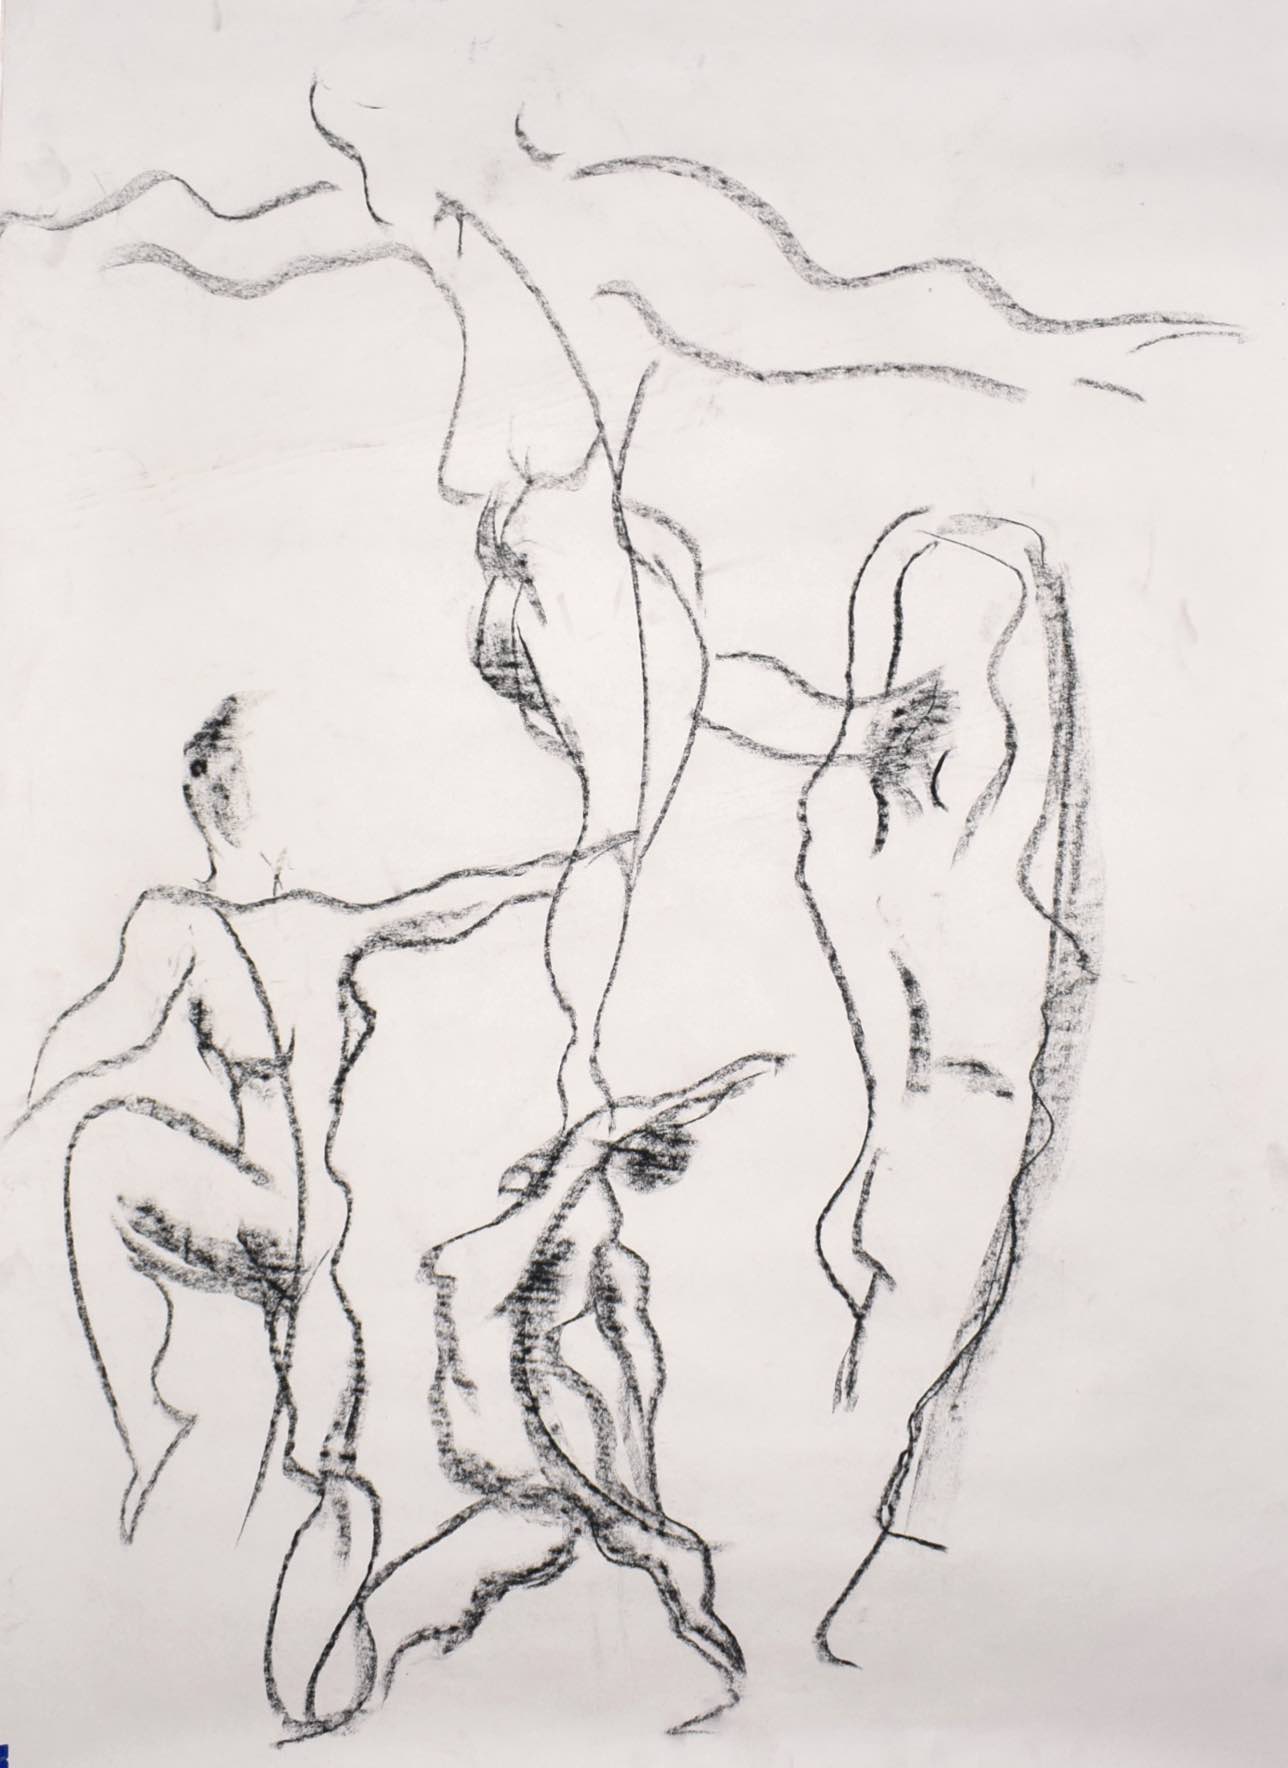 Drawing of four nude human figures in motion